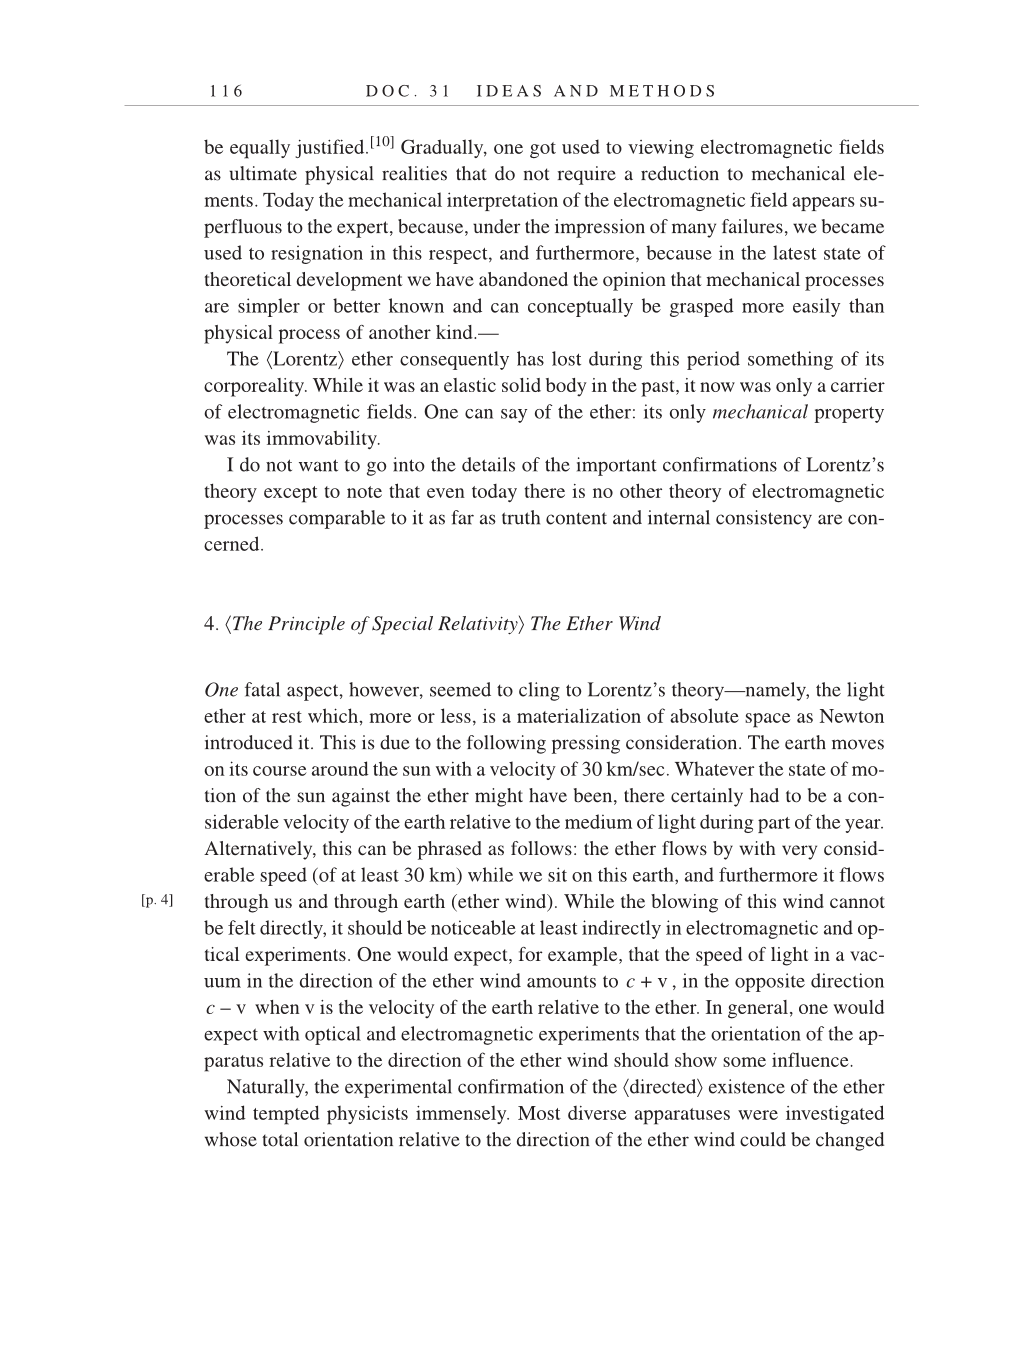 Volume 7: The Berlin Years: Writings, 1918-1921 (English translation supplement) page 116